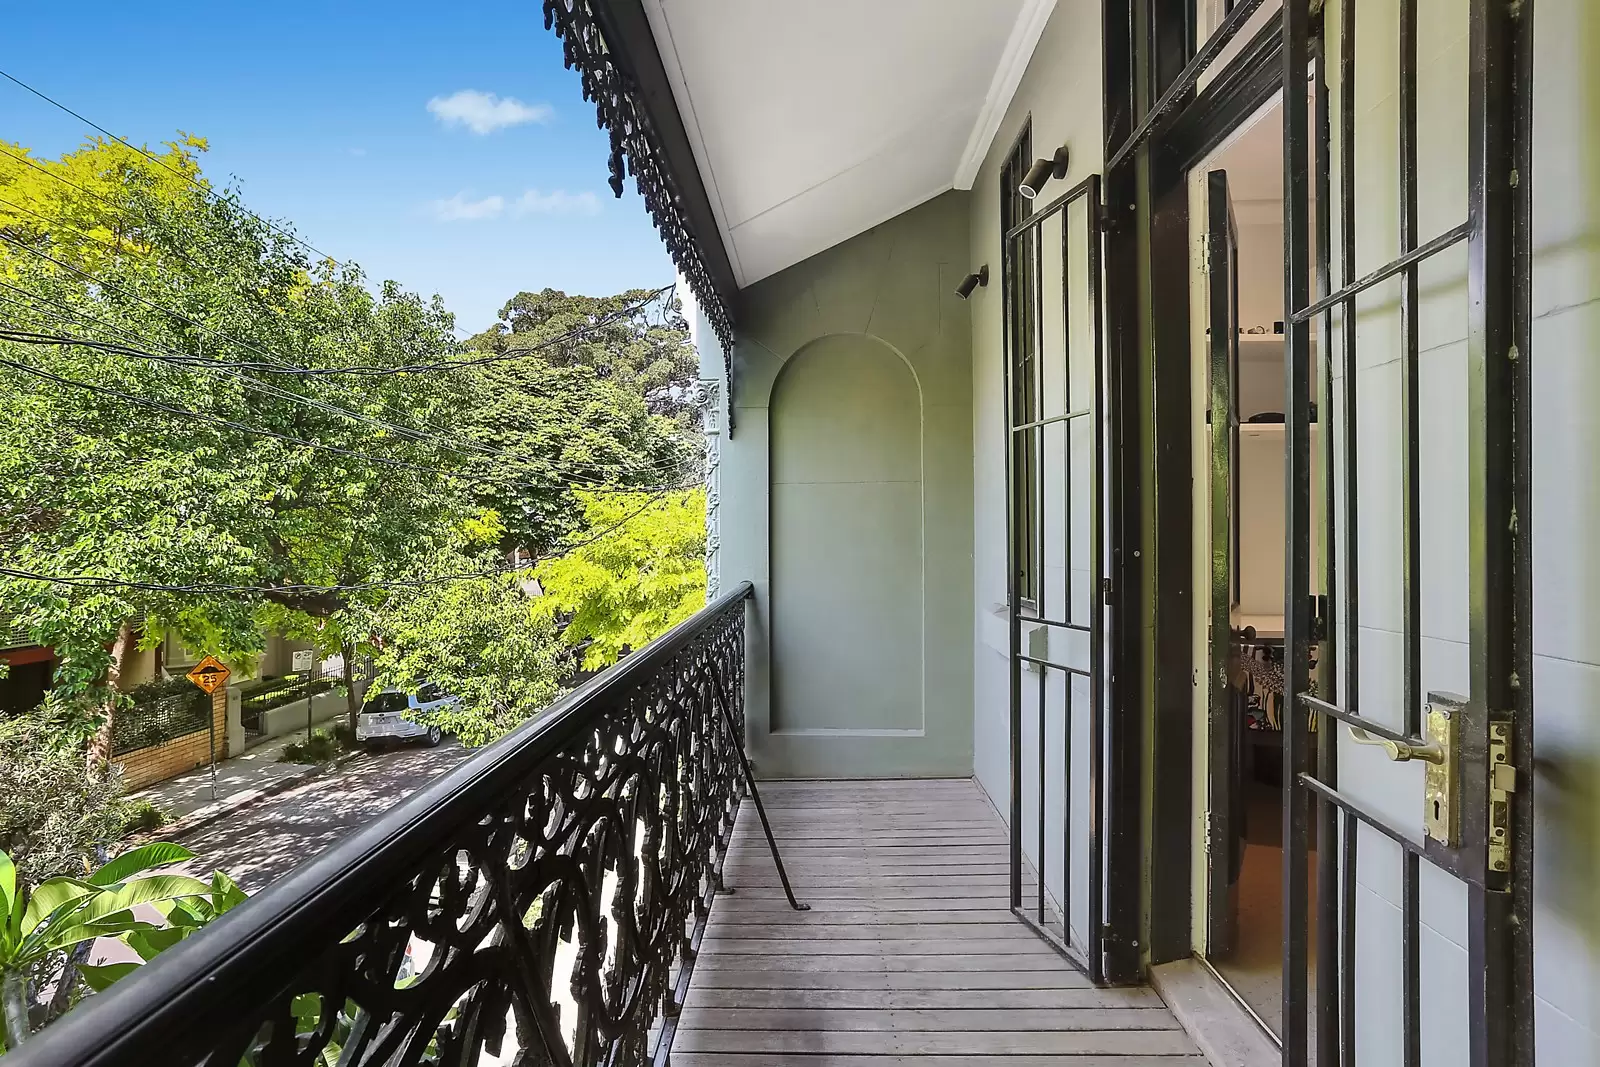 Photo #6: 31 Nobbs Street, Surry Hills - Sold by Sydney Sotheby's International Realty